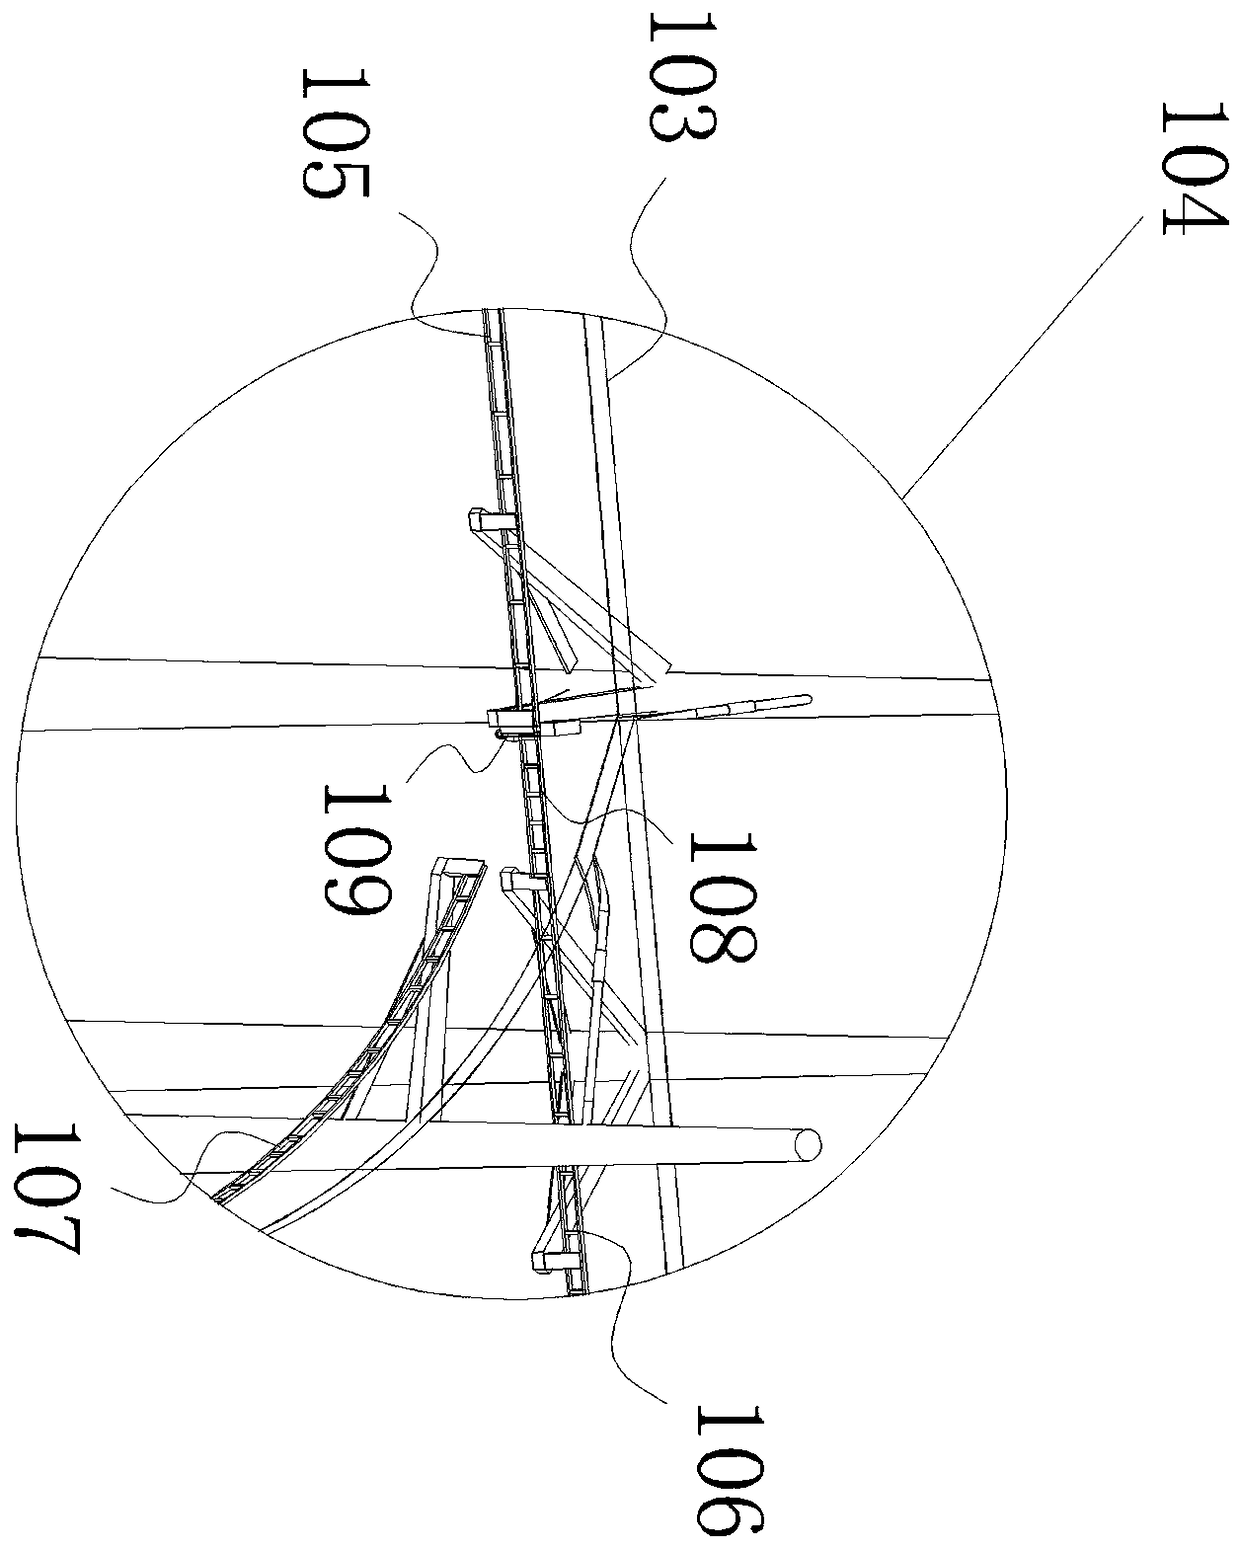 An unmanned intelligent express delivery device and method